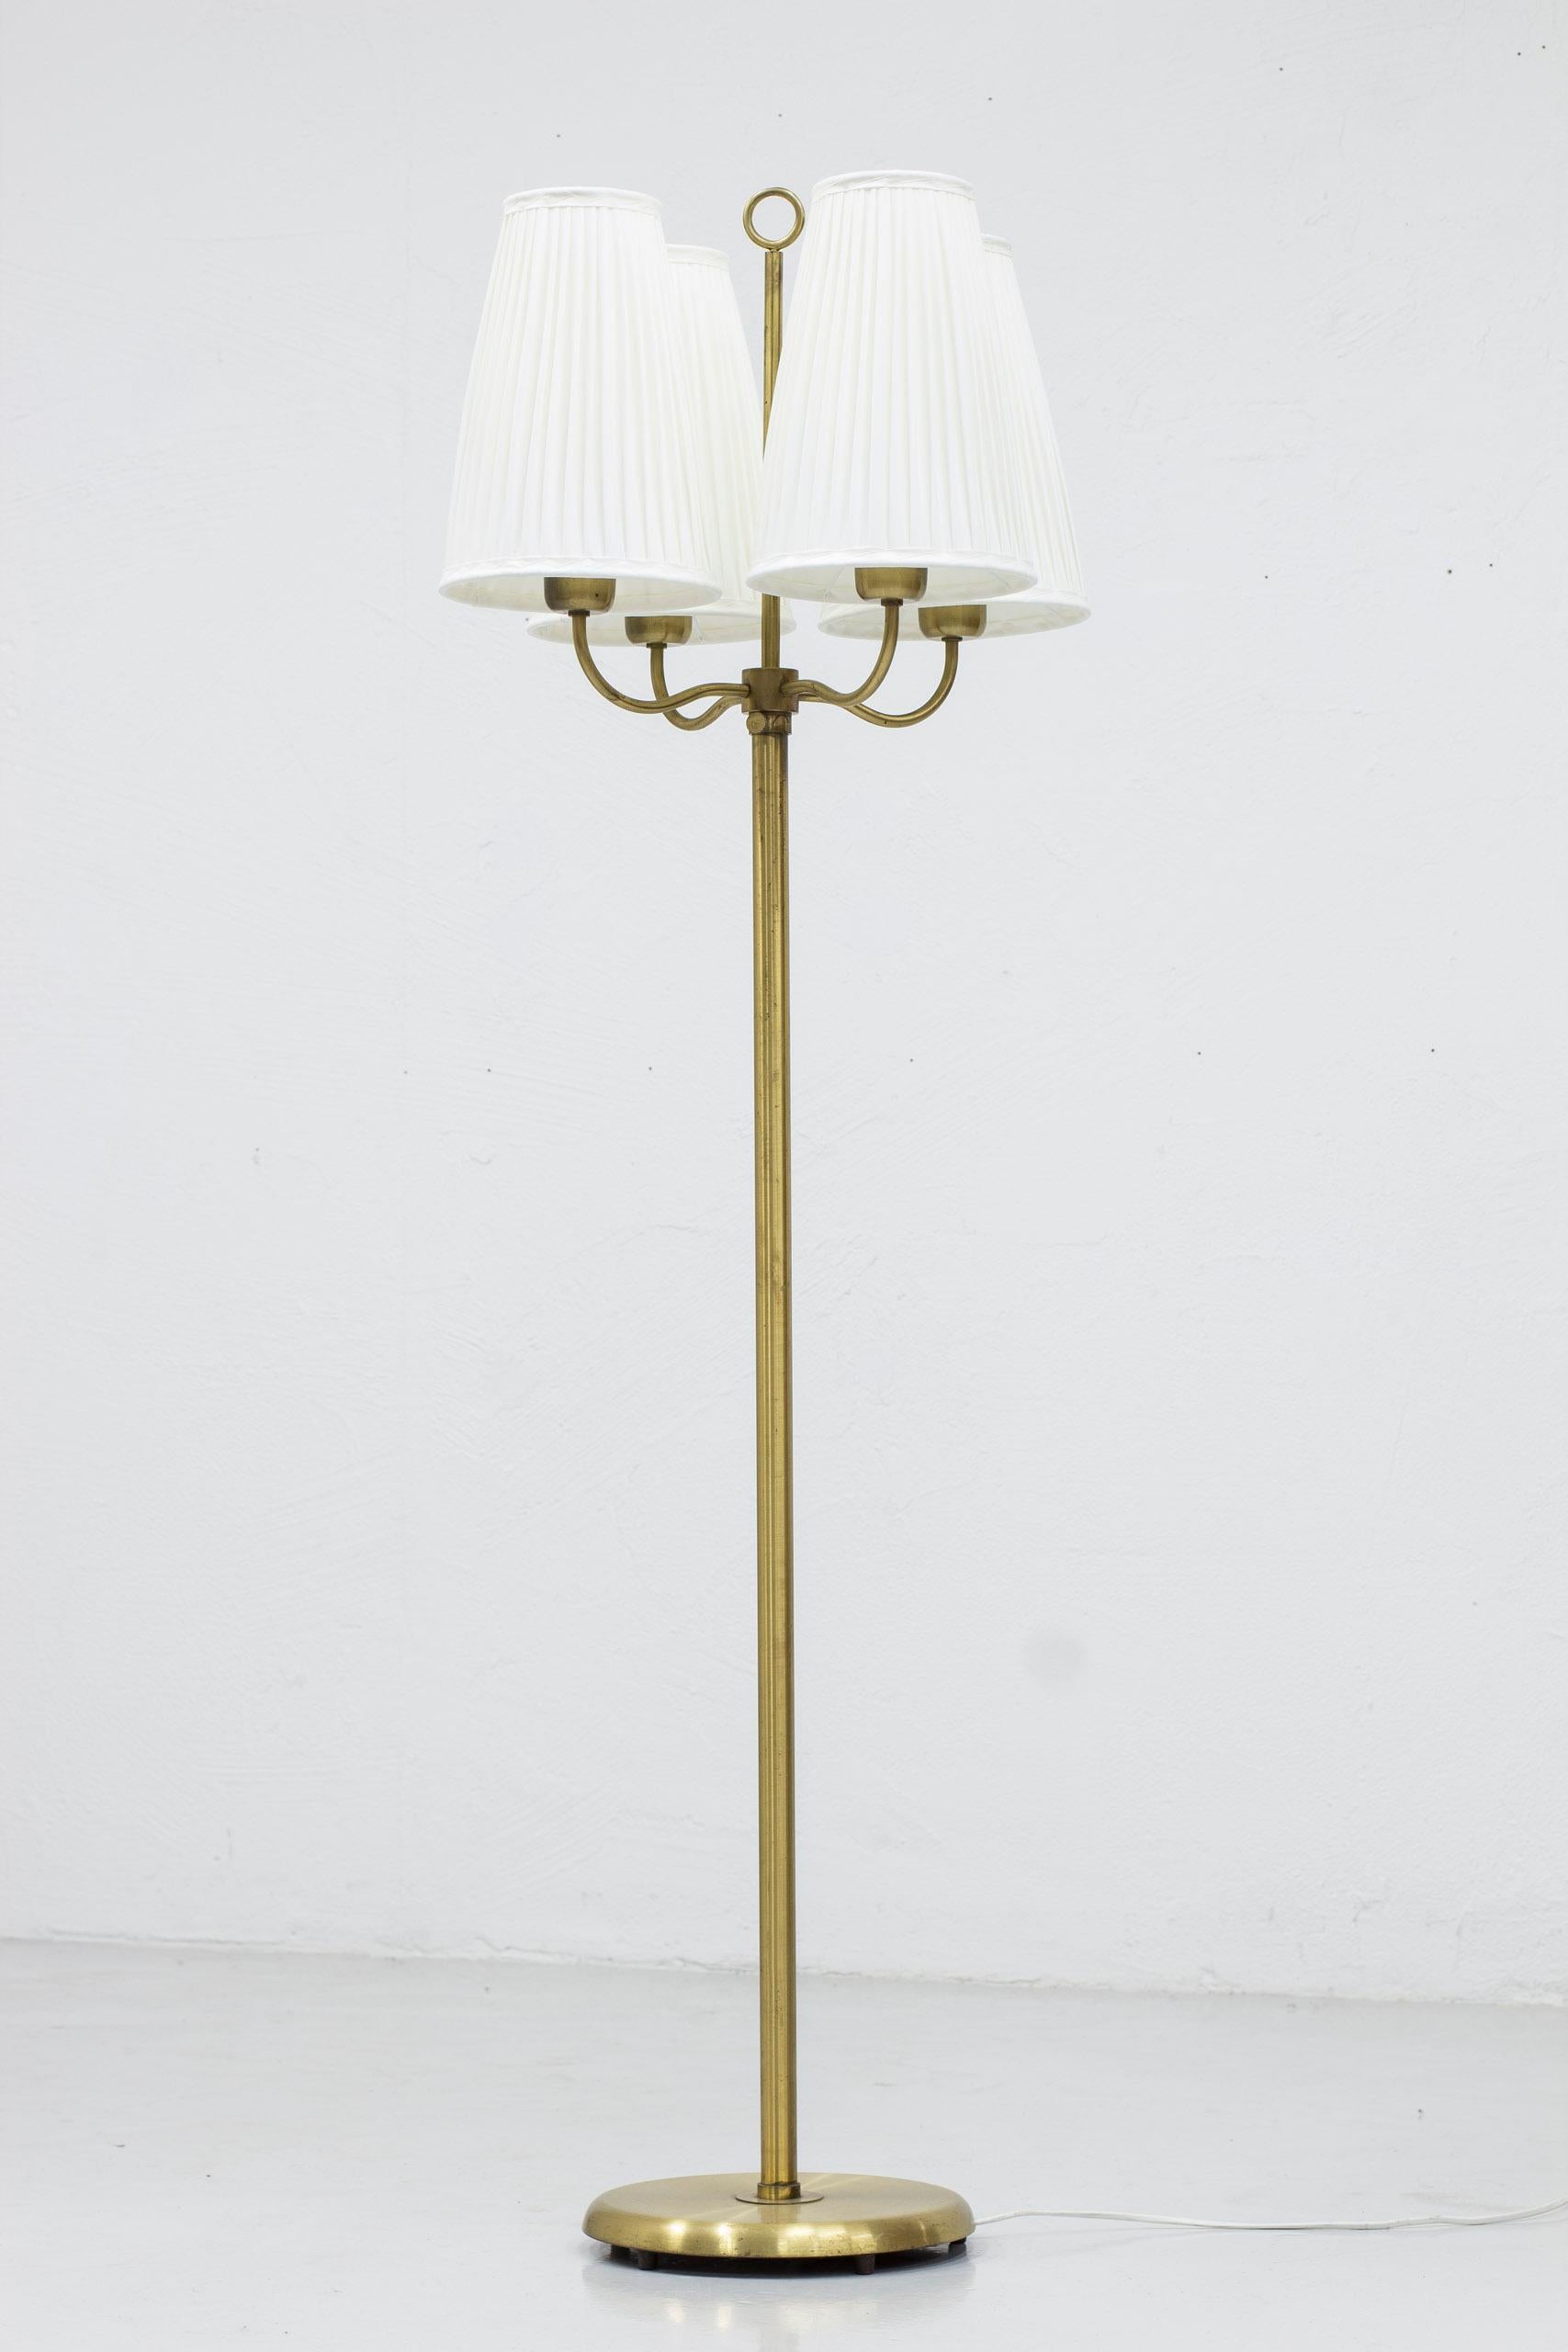 Four armed Swedish modern floor lamp reminiscent to the works of Josef Frank. Designed and produced in Sweden, ca 1940s. Made from brass with four large hand sewn shades with pleated fabric in off white. The lamp is adjustable in height. Light